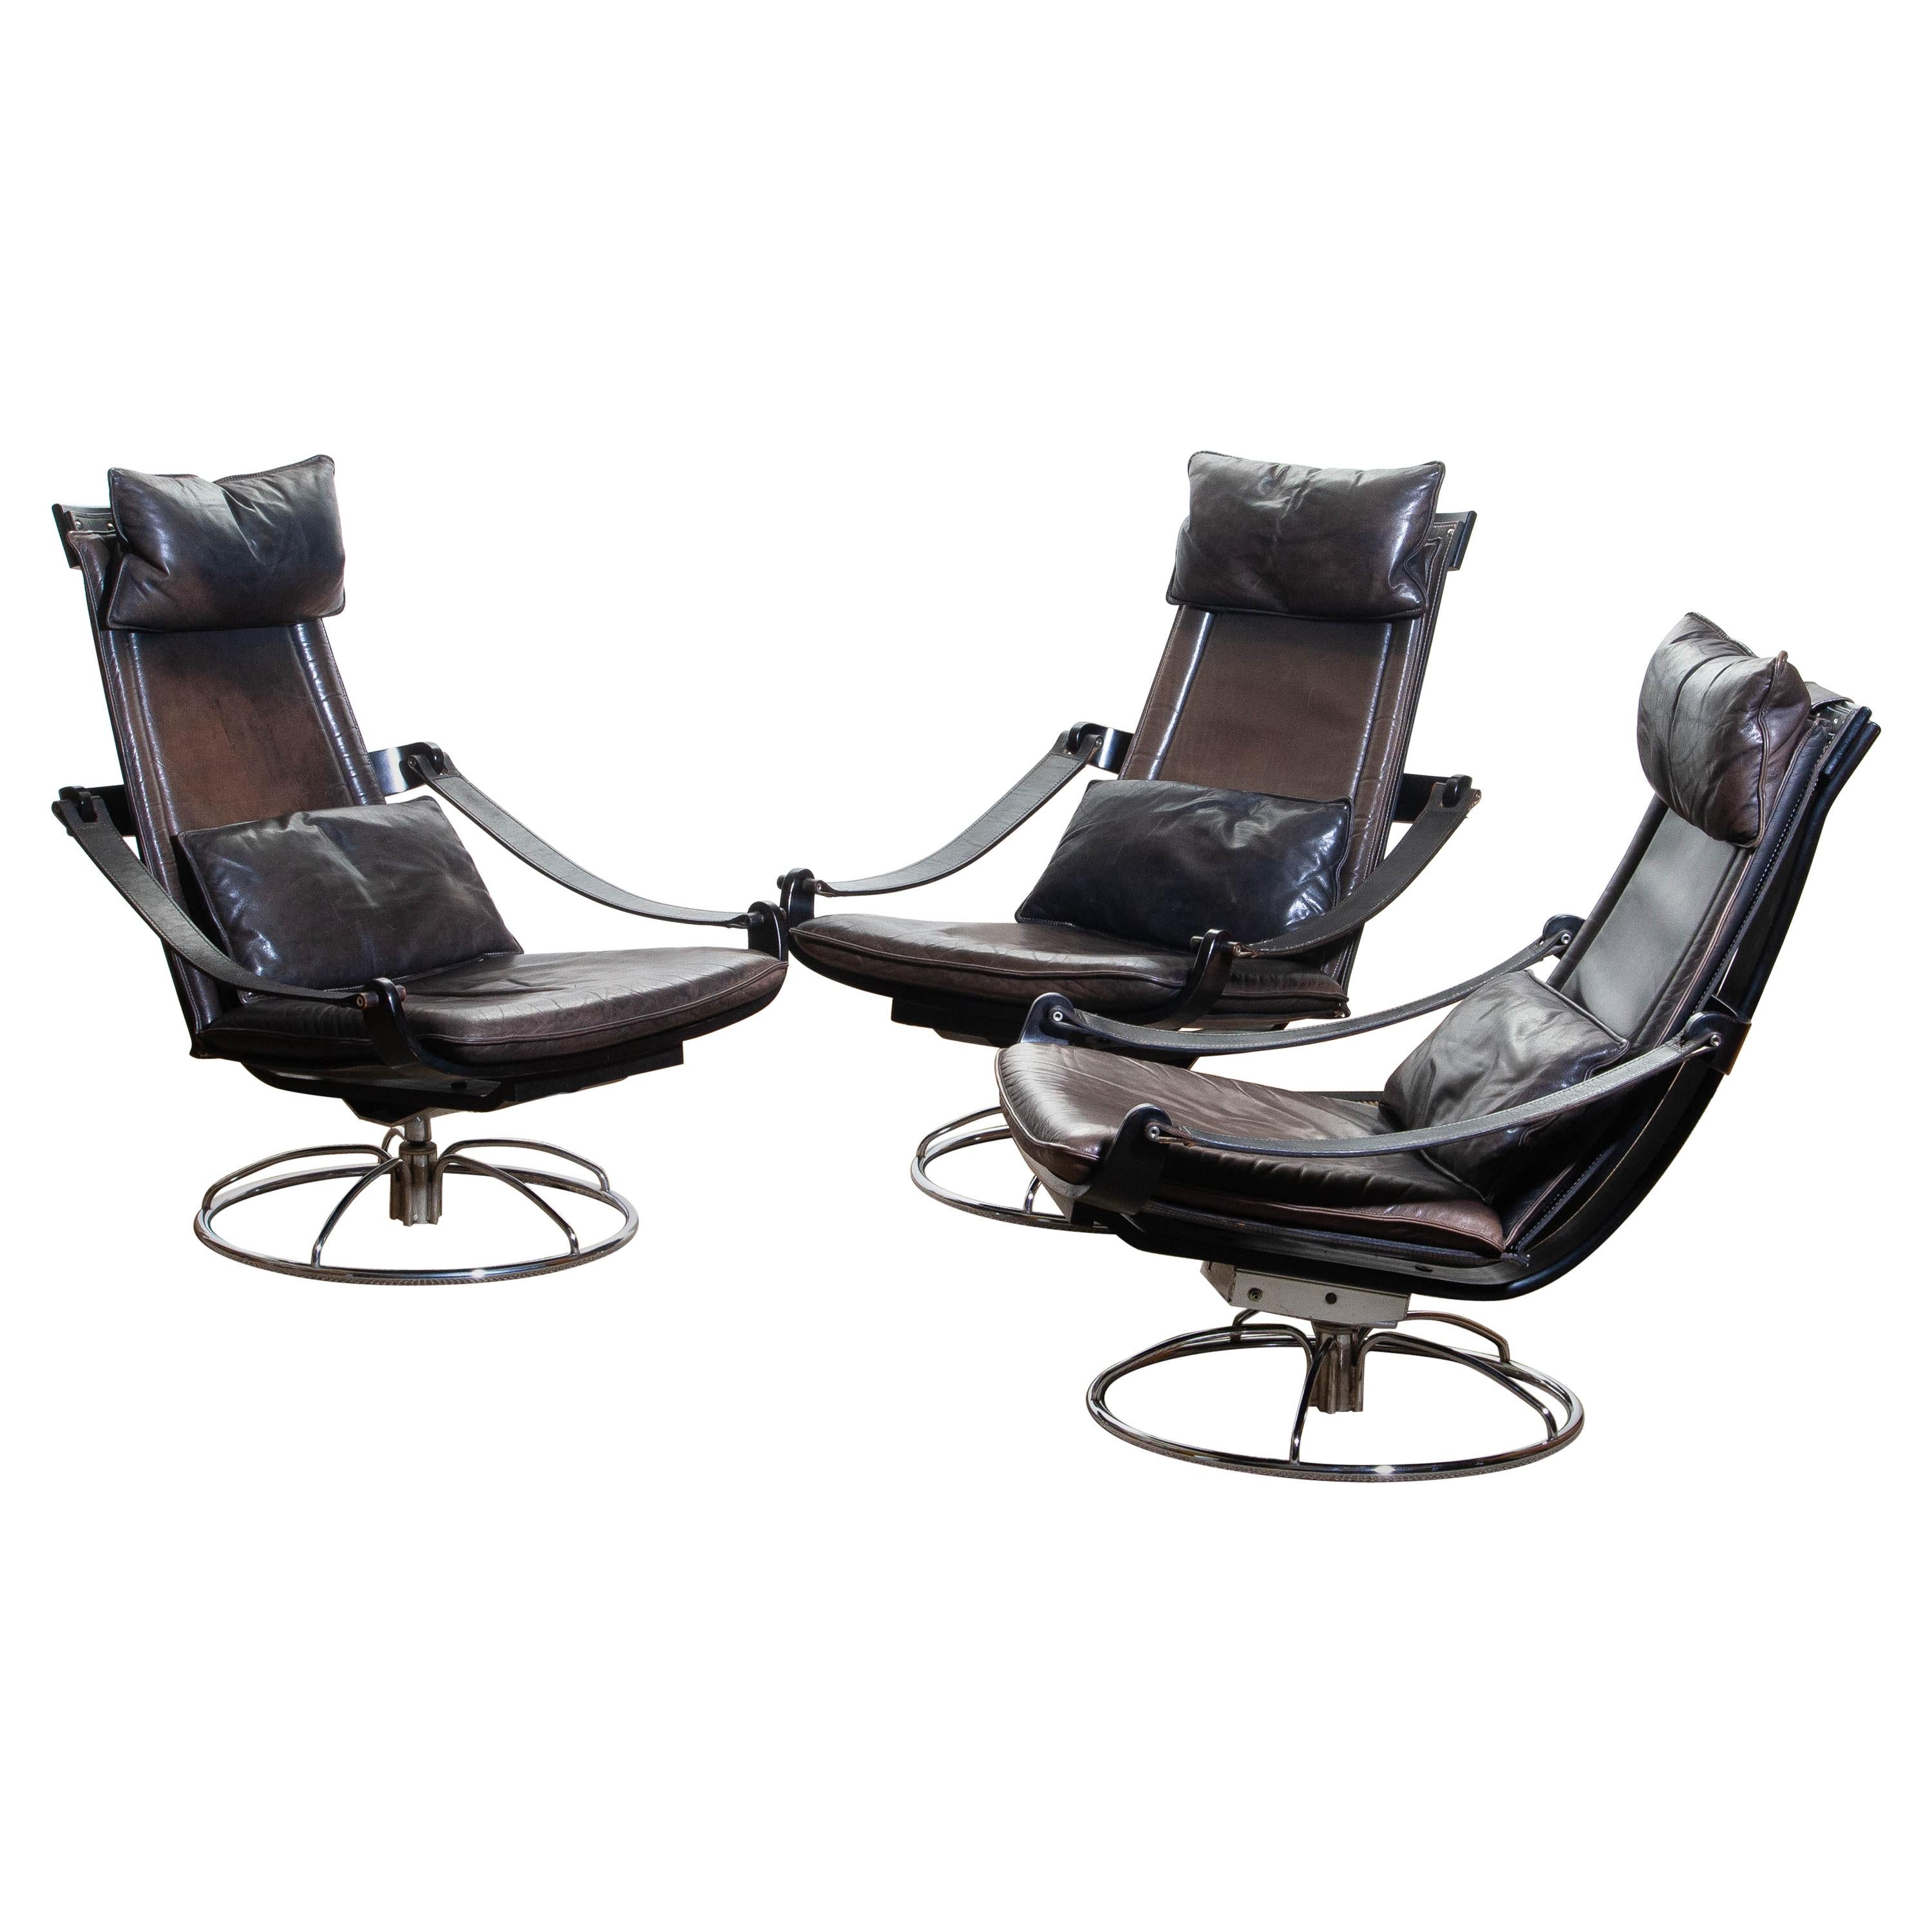 Extremely beautiful and artistic set of three swivel easy / lounge chairs designed by Åke Fribytter for Nelo Sweden.
These high quality chairs features a plywood frame and Brown leather cushions and a chromed metal base.
One chair has got an